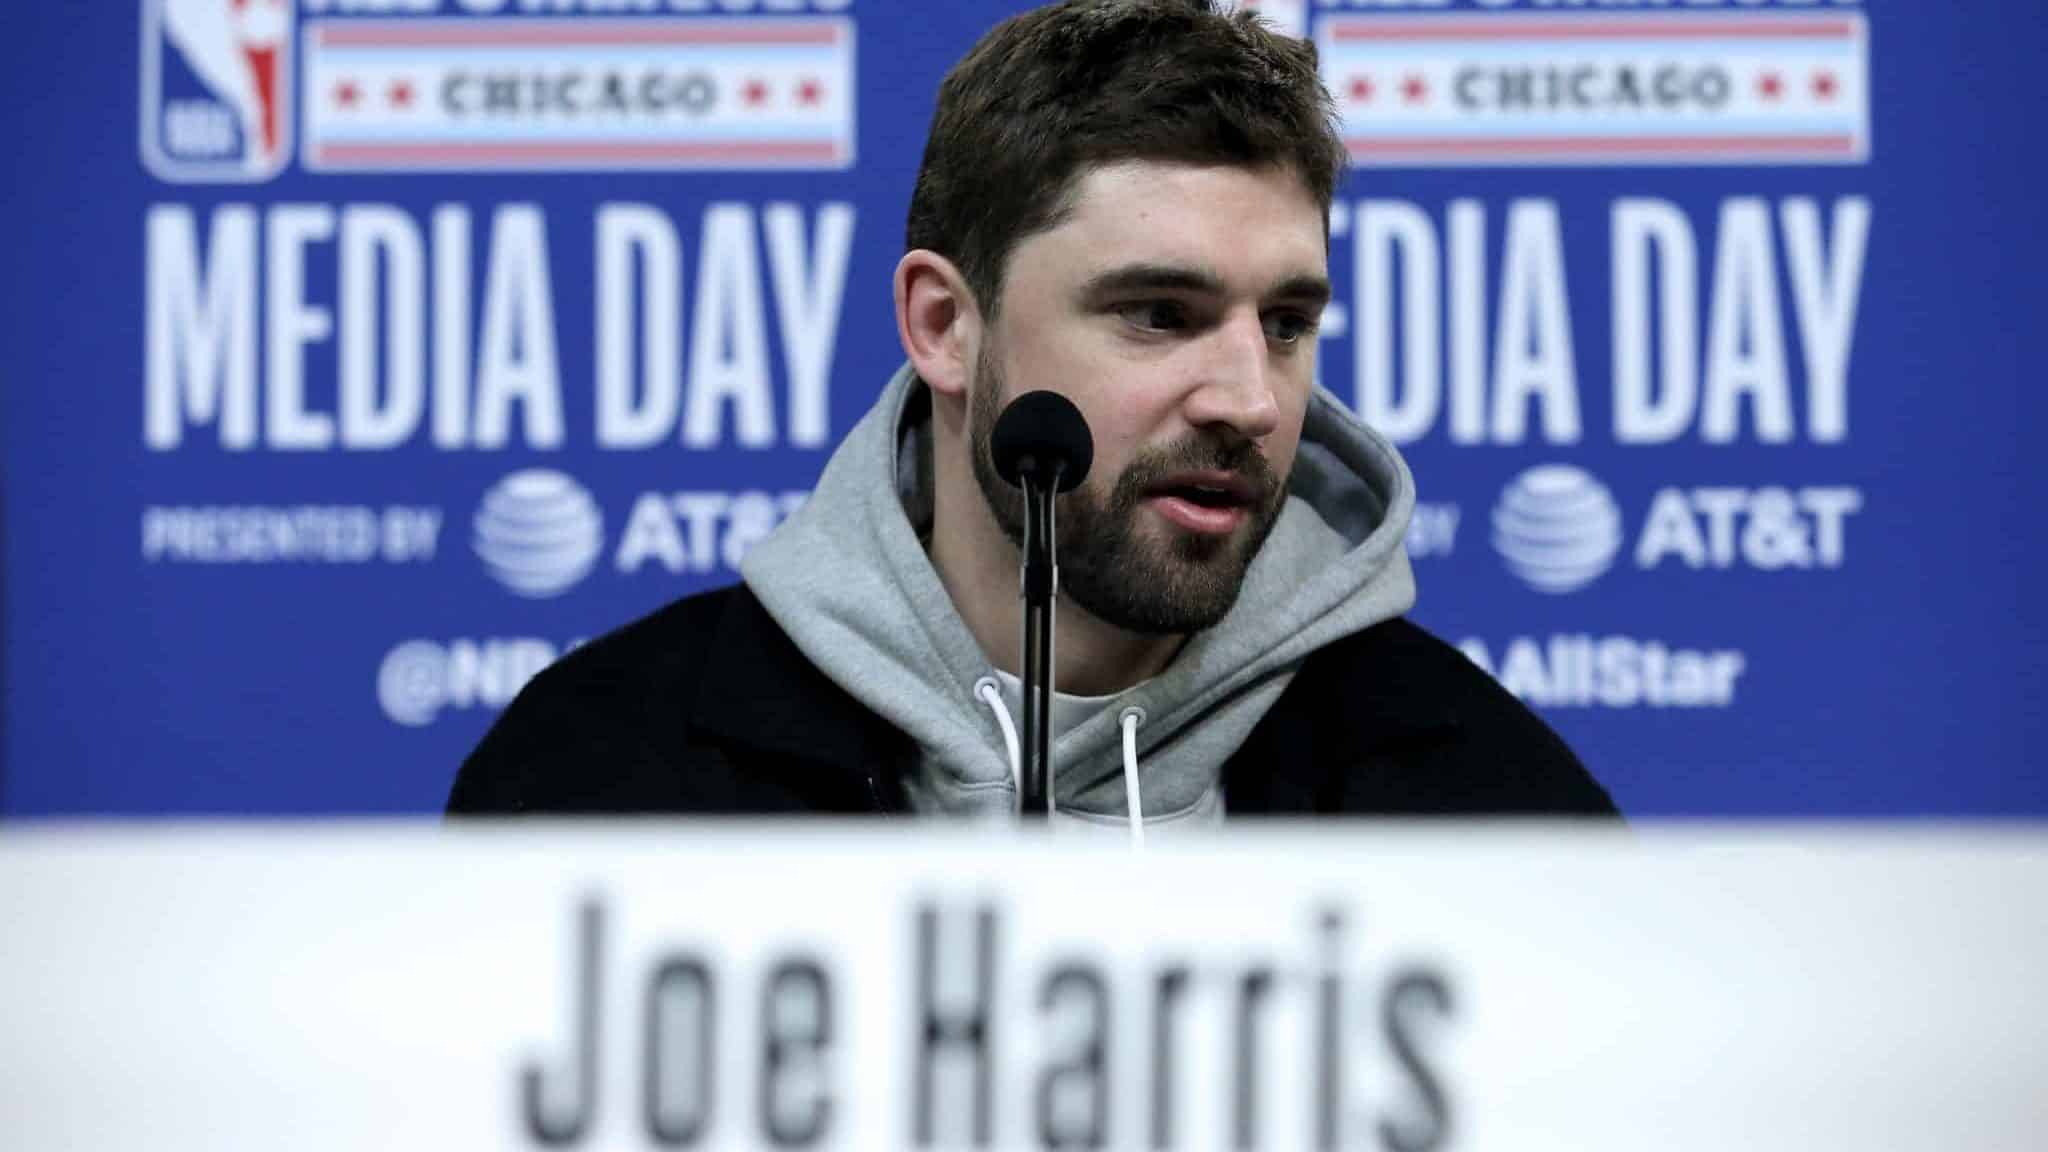 CHICAGO, ILLINOIS - FEBRUARY 15: Joe Harris of the Brooklyn Nets speaks to the media during 2020 NBA All-Star - Practice & Media Day at Wintrust Arena on February 15, 2020 in Chicago, Illinois. NOTE TO USER: User expressly acknowledges and agrees that, by downloading and or using this photograph, User is consenting to the terms and conditions of the Getty Images License Agreement.